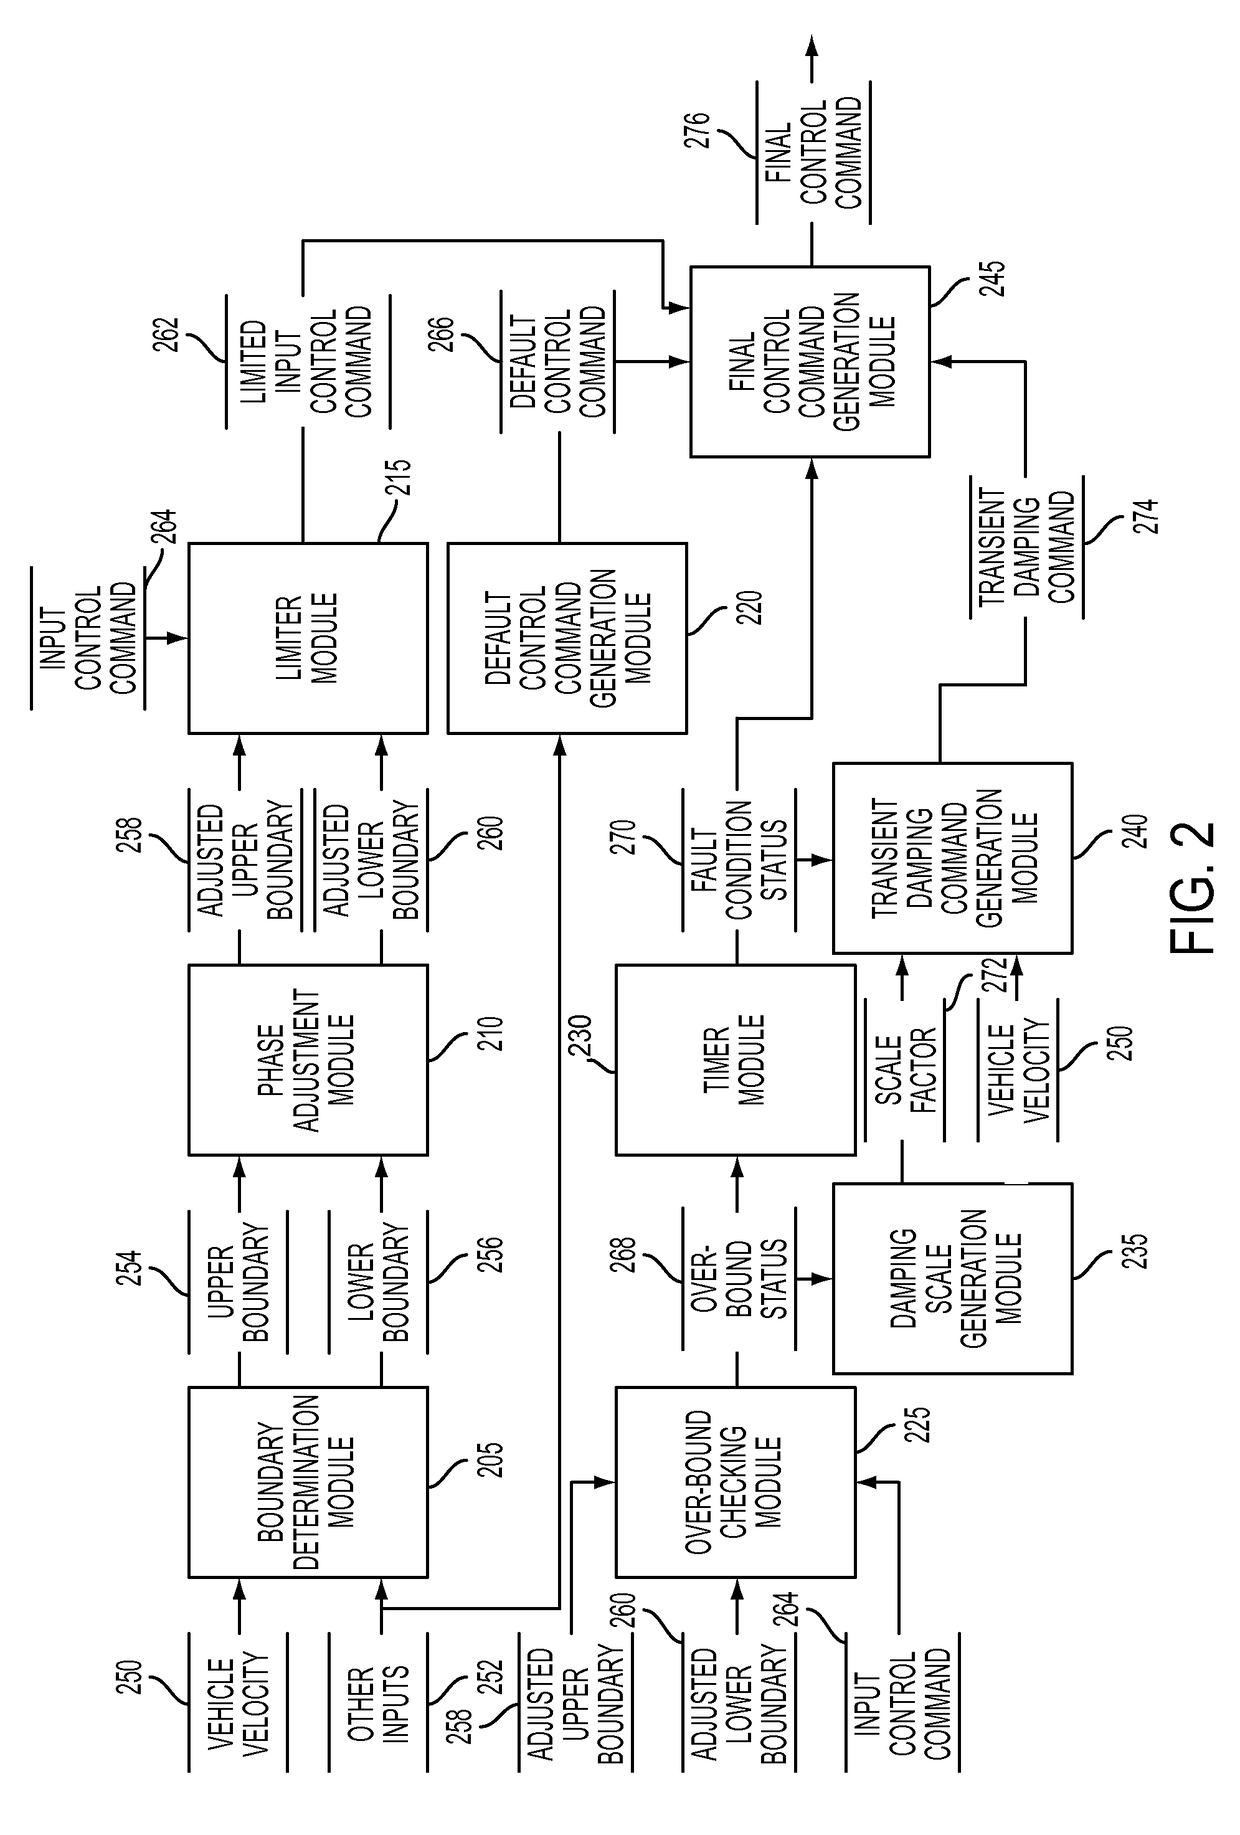 Systematic abnormality detection in control commands for controlling power steering system